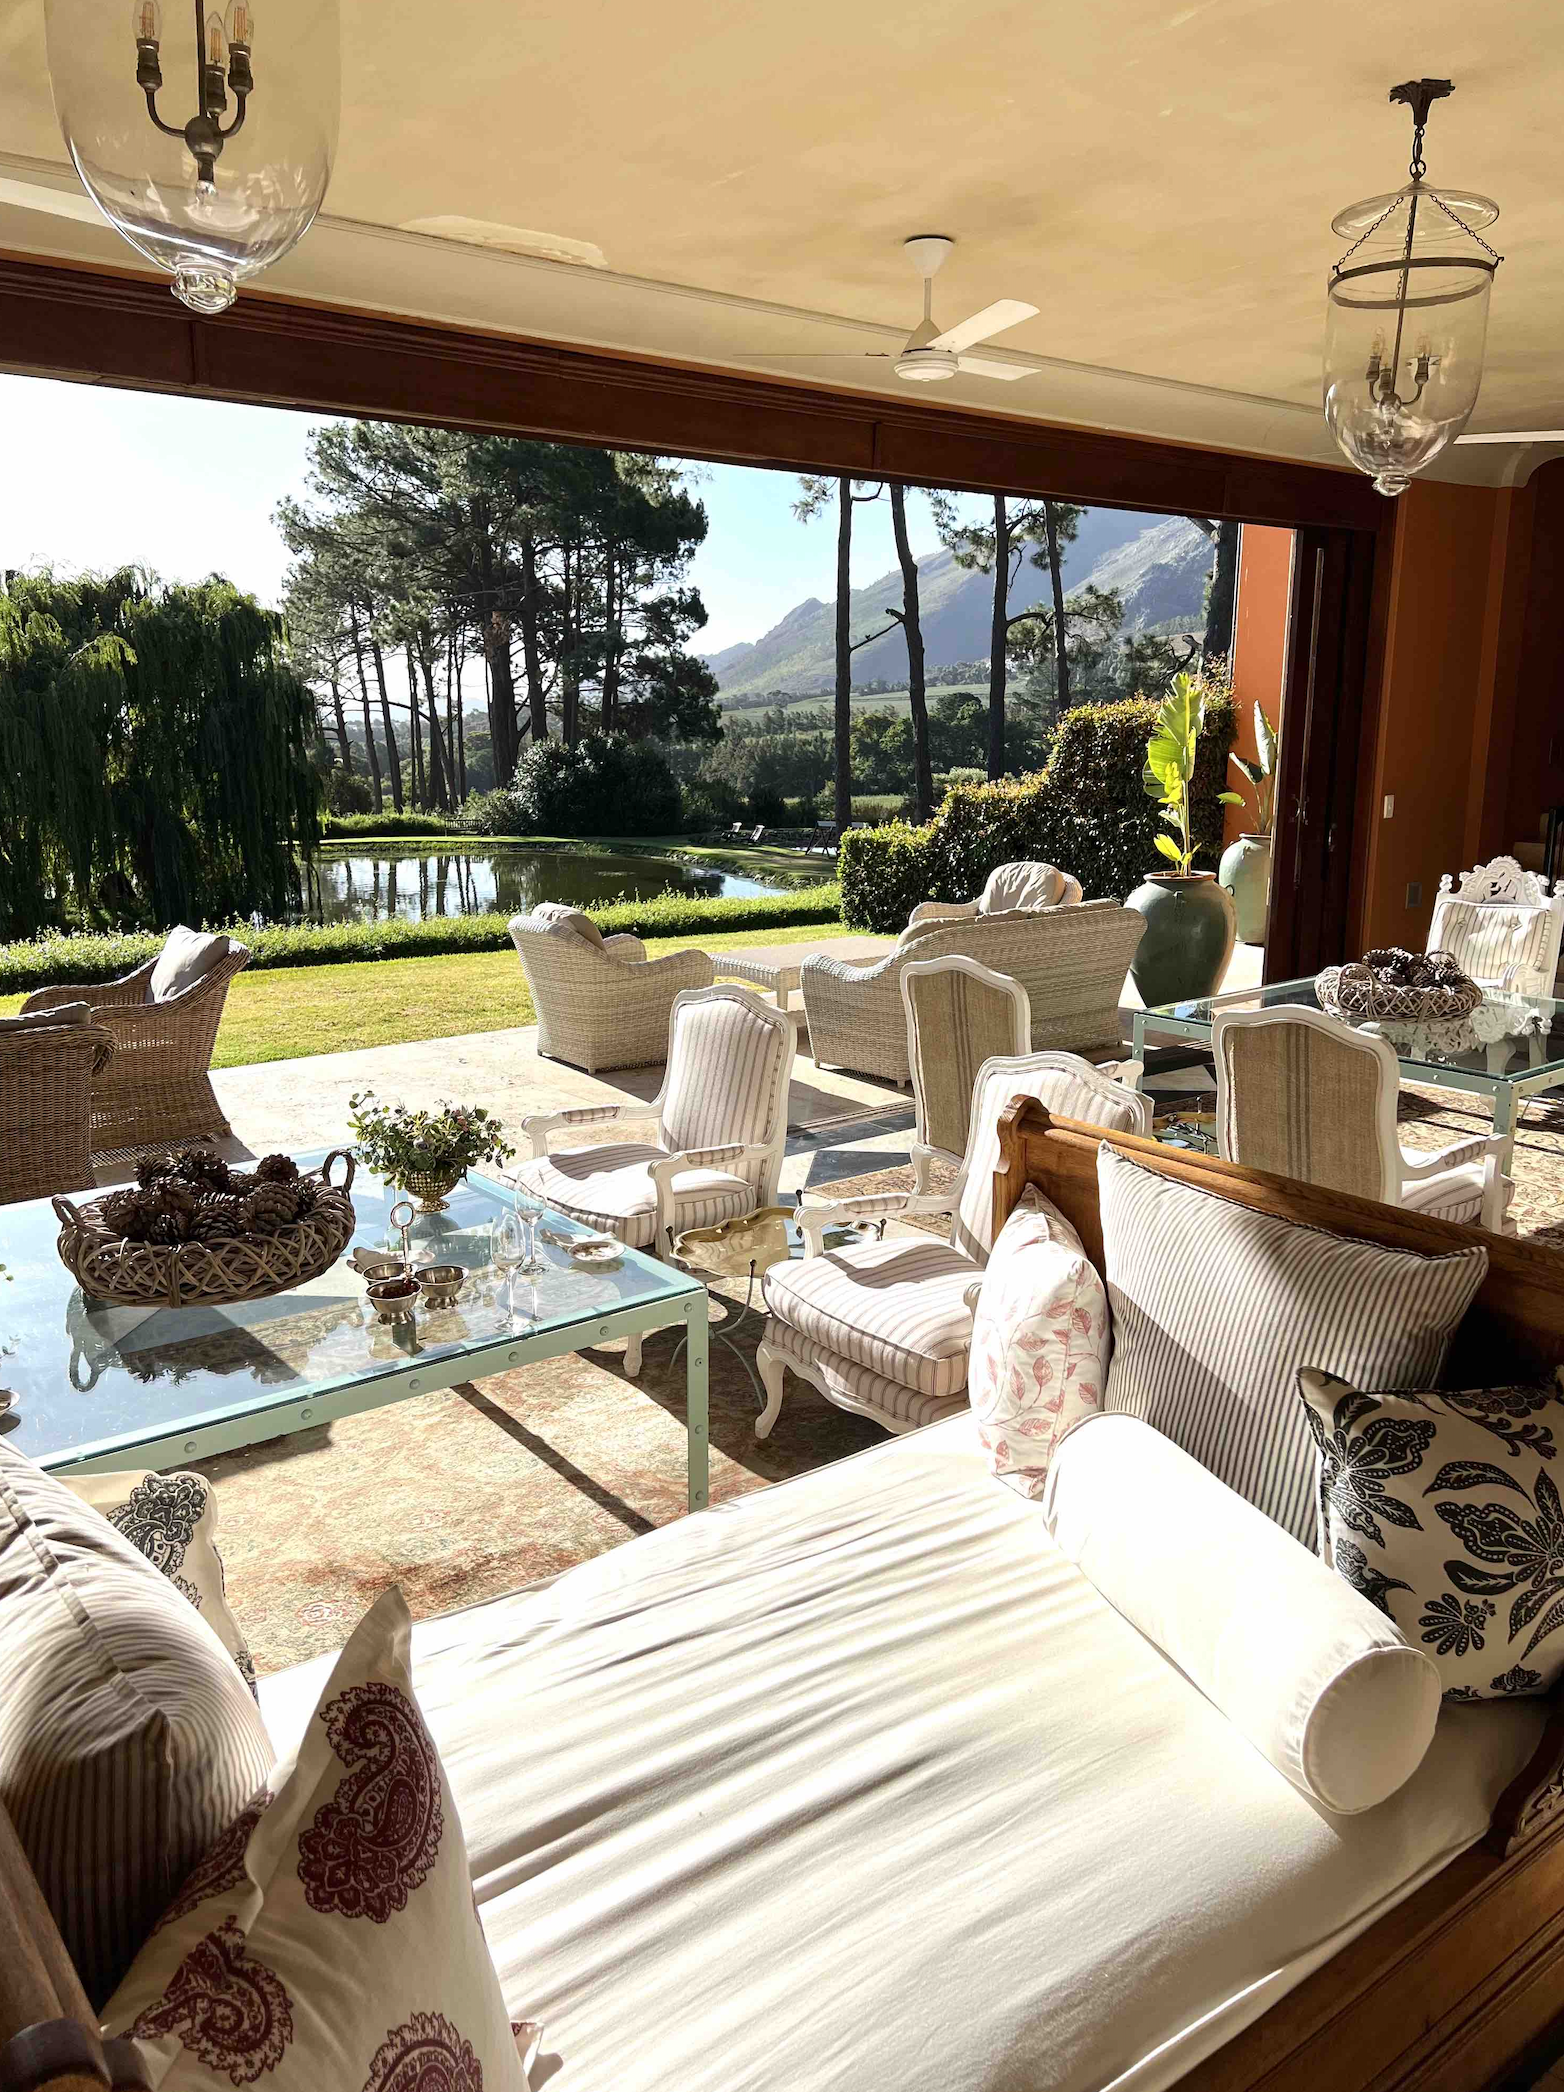 La Residence is a rather expensive boutique hotel in Franschhoek.